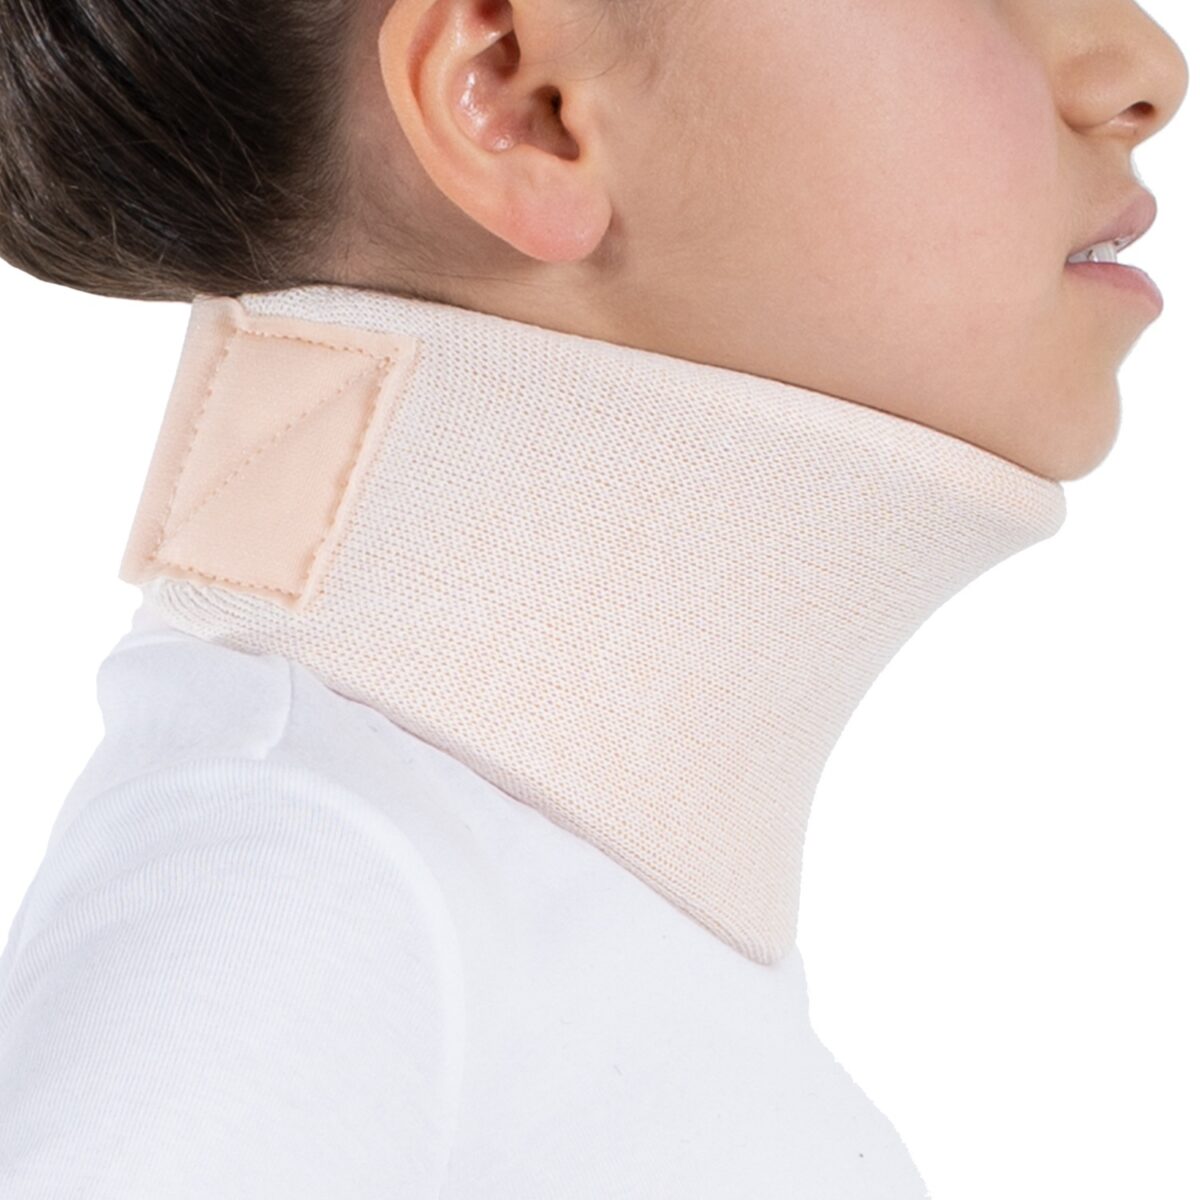 wingmed orthopedic equipments W903 nelson collar with fabric coated 69